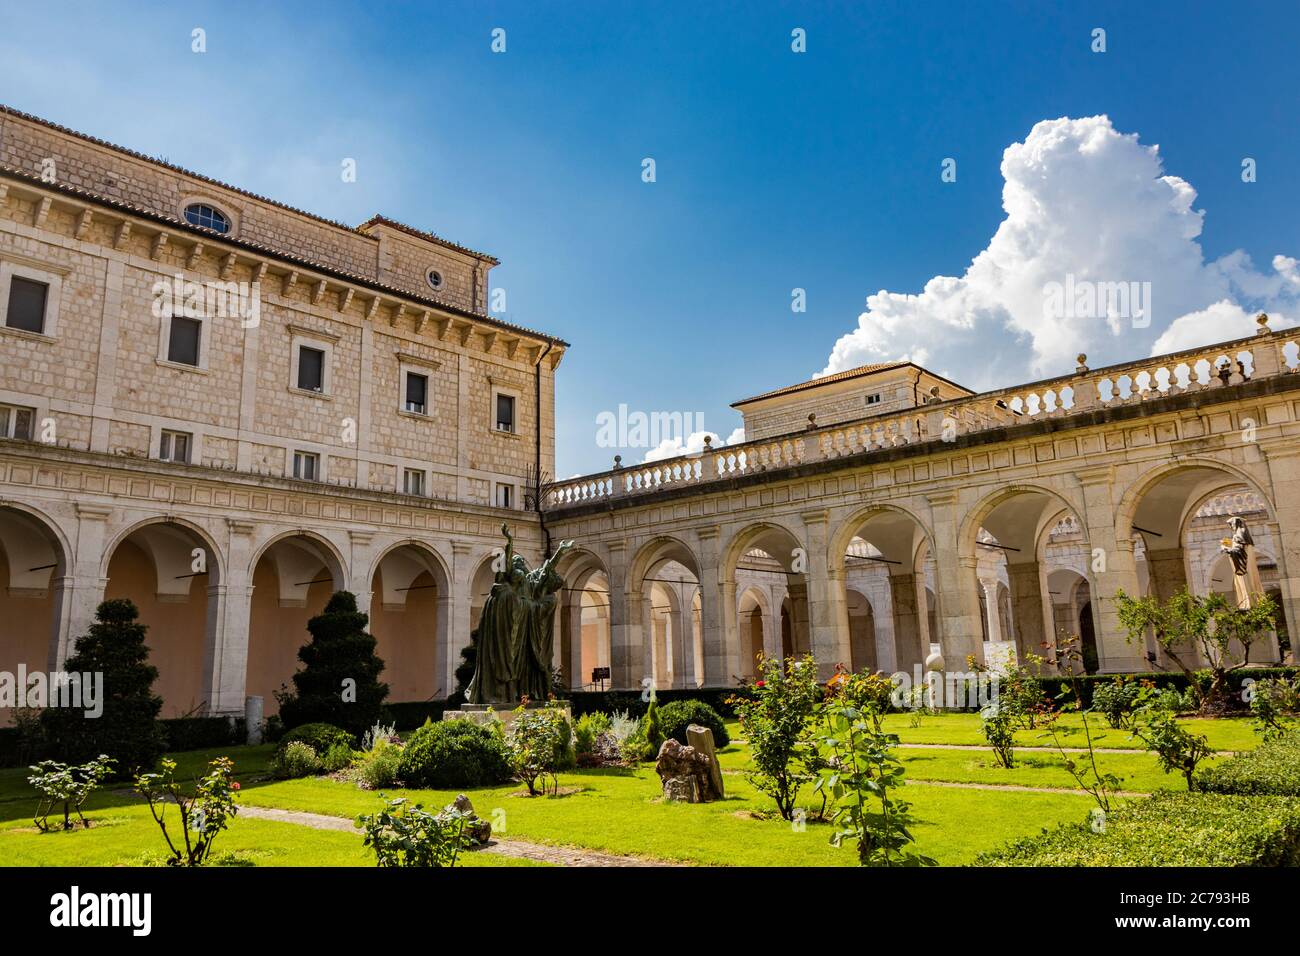 July 3, 2020 - Montecassino Abbey, Cassino, Italy - Benedictine monastery located on the top of Montecassino is the oldest monastery in Italy. The clo Stock Photo